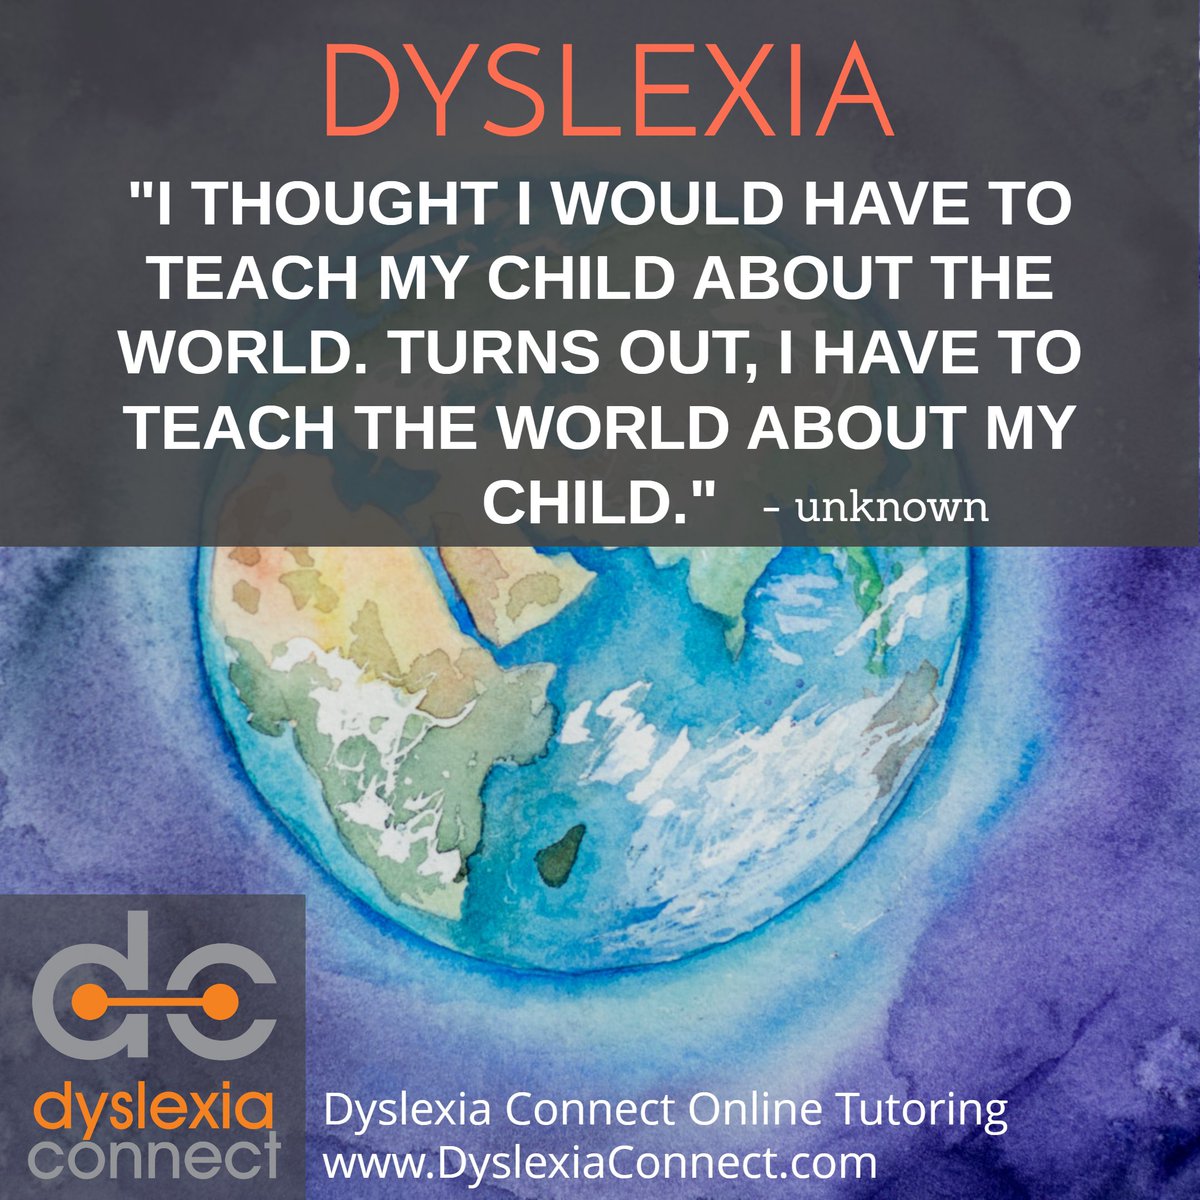 Do you ever feel tired of dealing with all of the misinformation and persistent myths about dyslexia? You may feel like you need to educate everyone about how dyslexia affects your child. The work you do helps raise awareness! DyslexiaConnect.com #dyslexia #adhd #dysgraphia